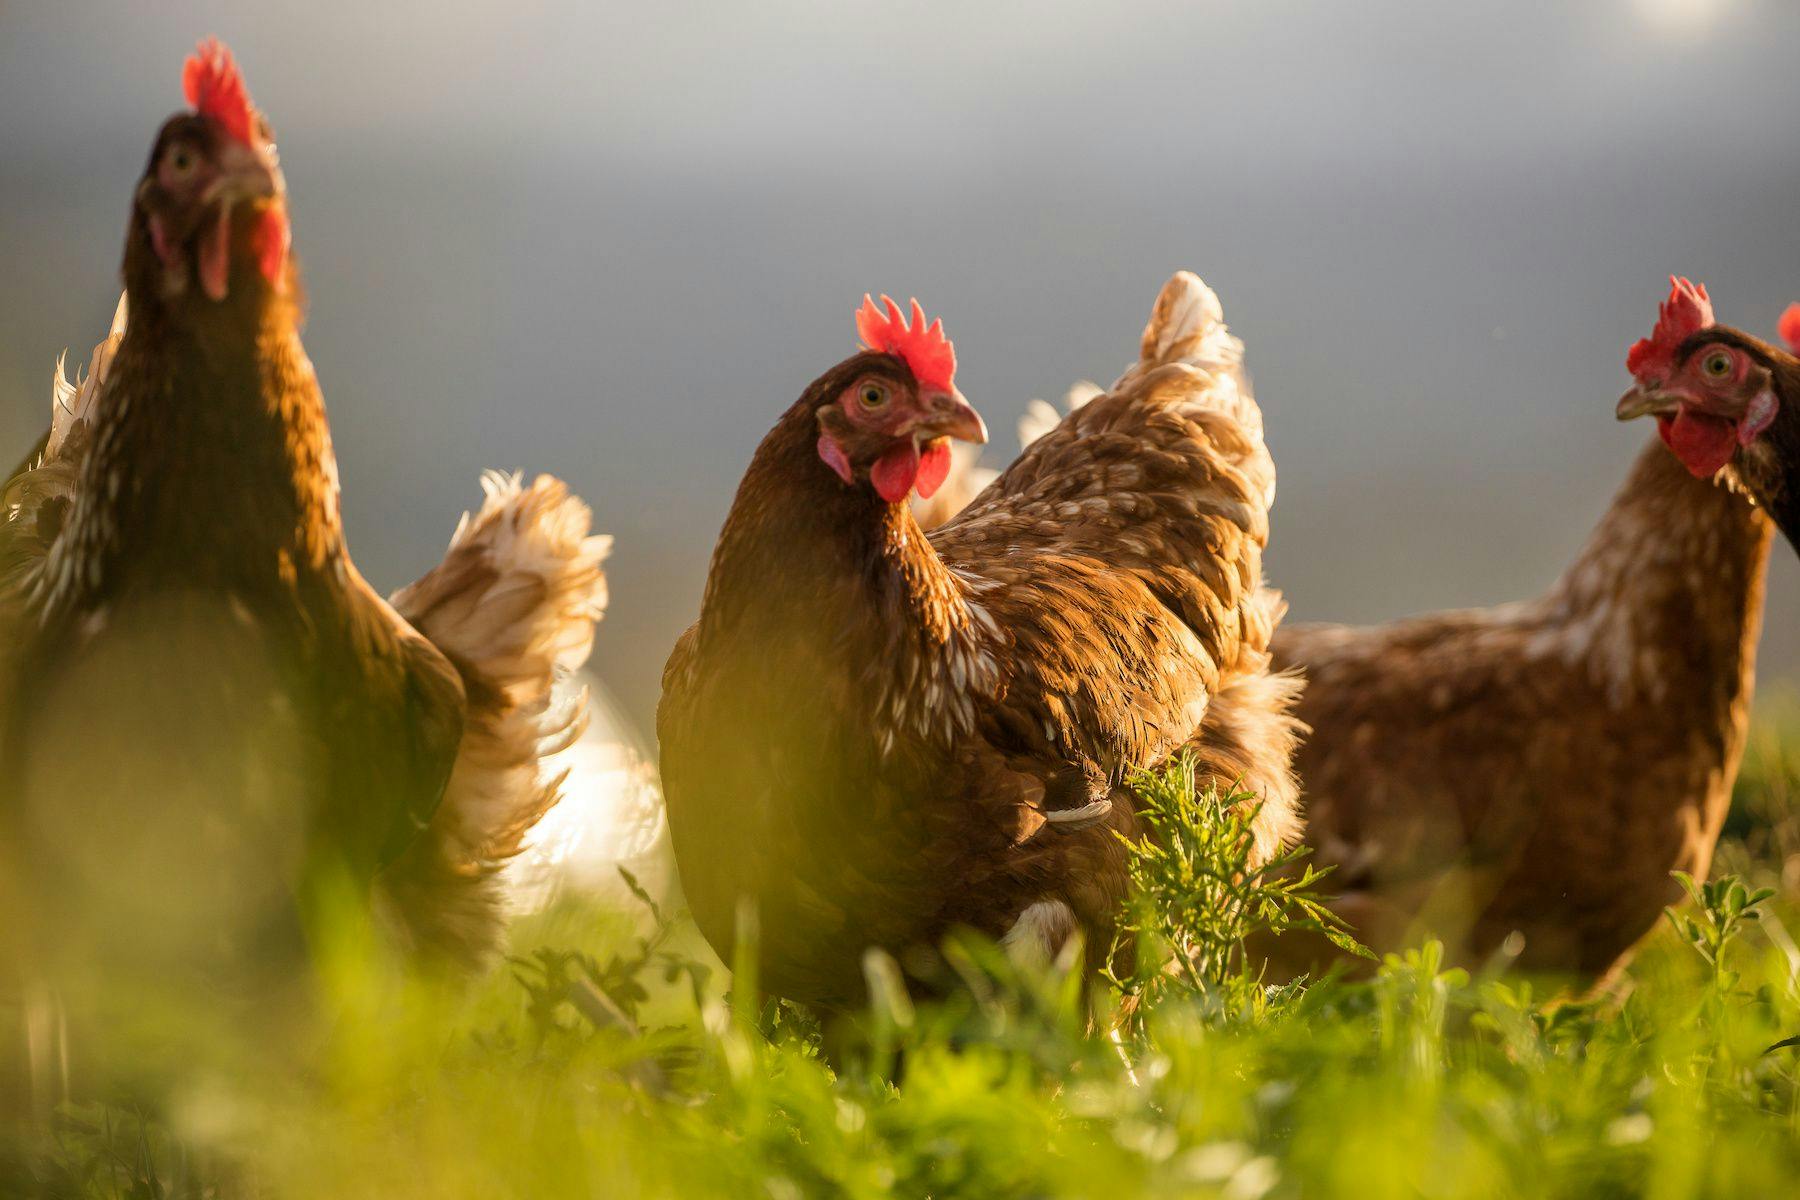 Avian influenza is often detected in wild birds and poultry farms across the US | image credit: Dewald / stock.adobe.com